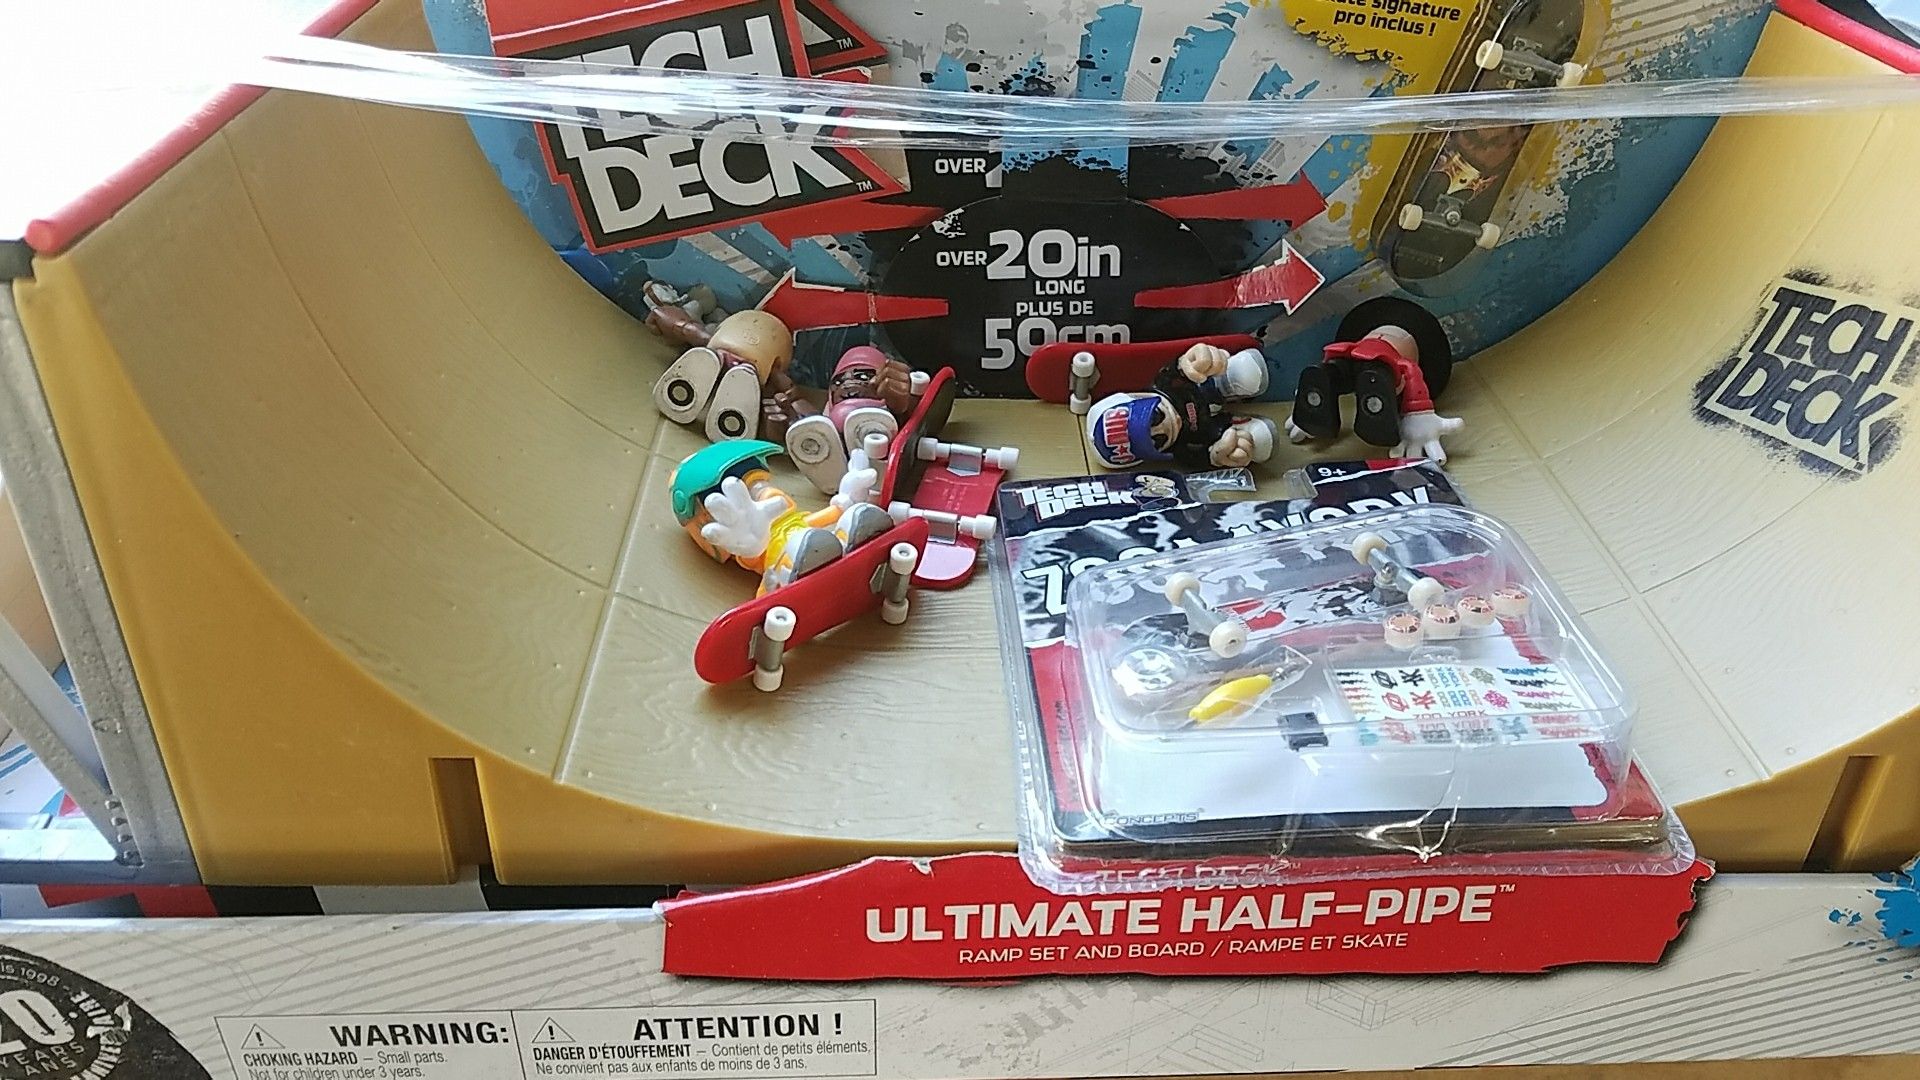 Tech deck ultimate half pipe and extras